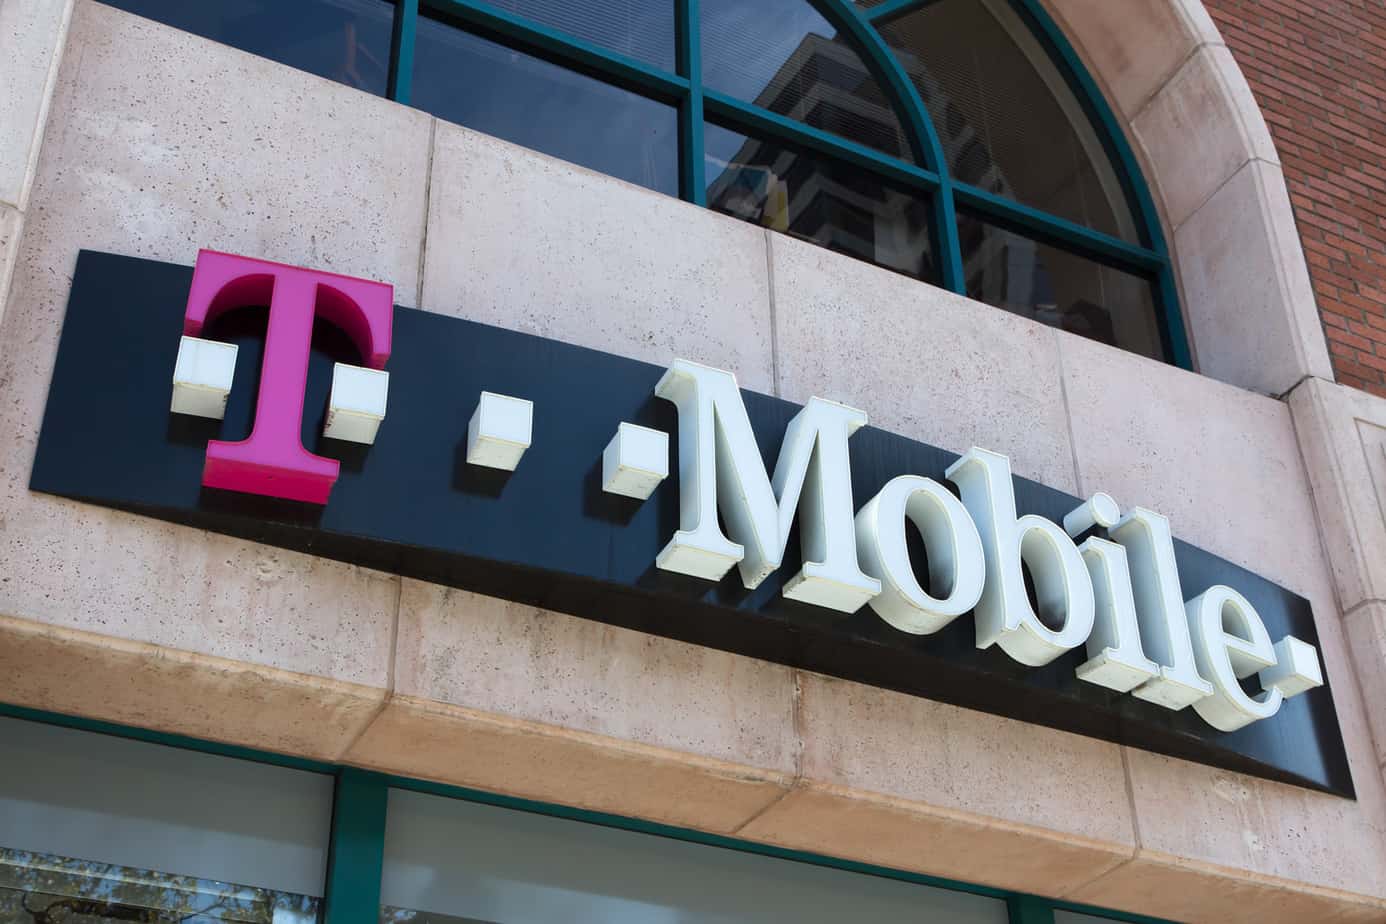 t-mobile-headquarters-hq-sign-image-poster-logo-brand